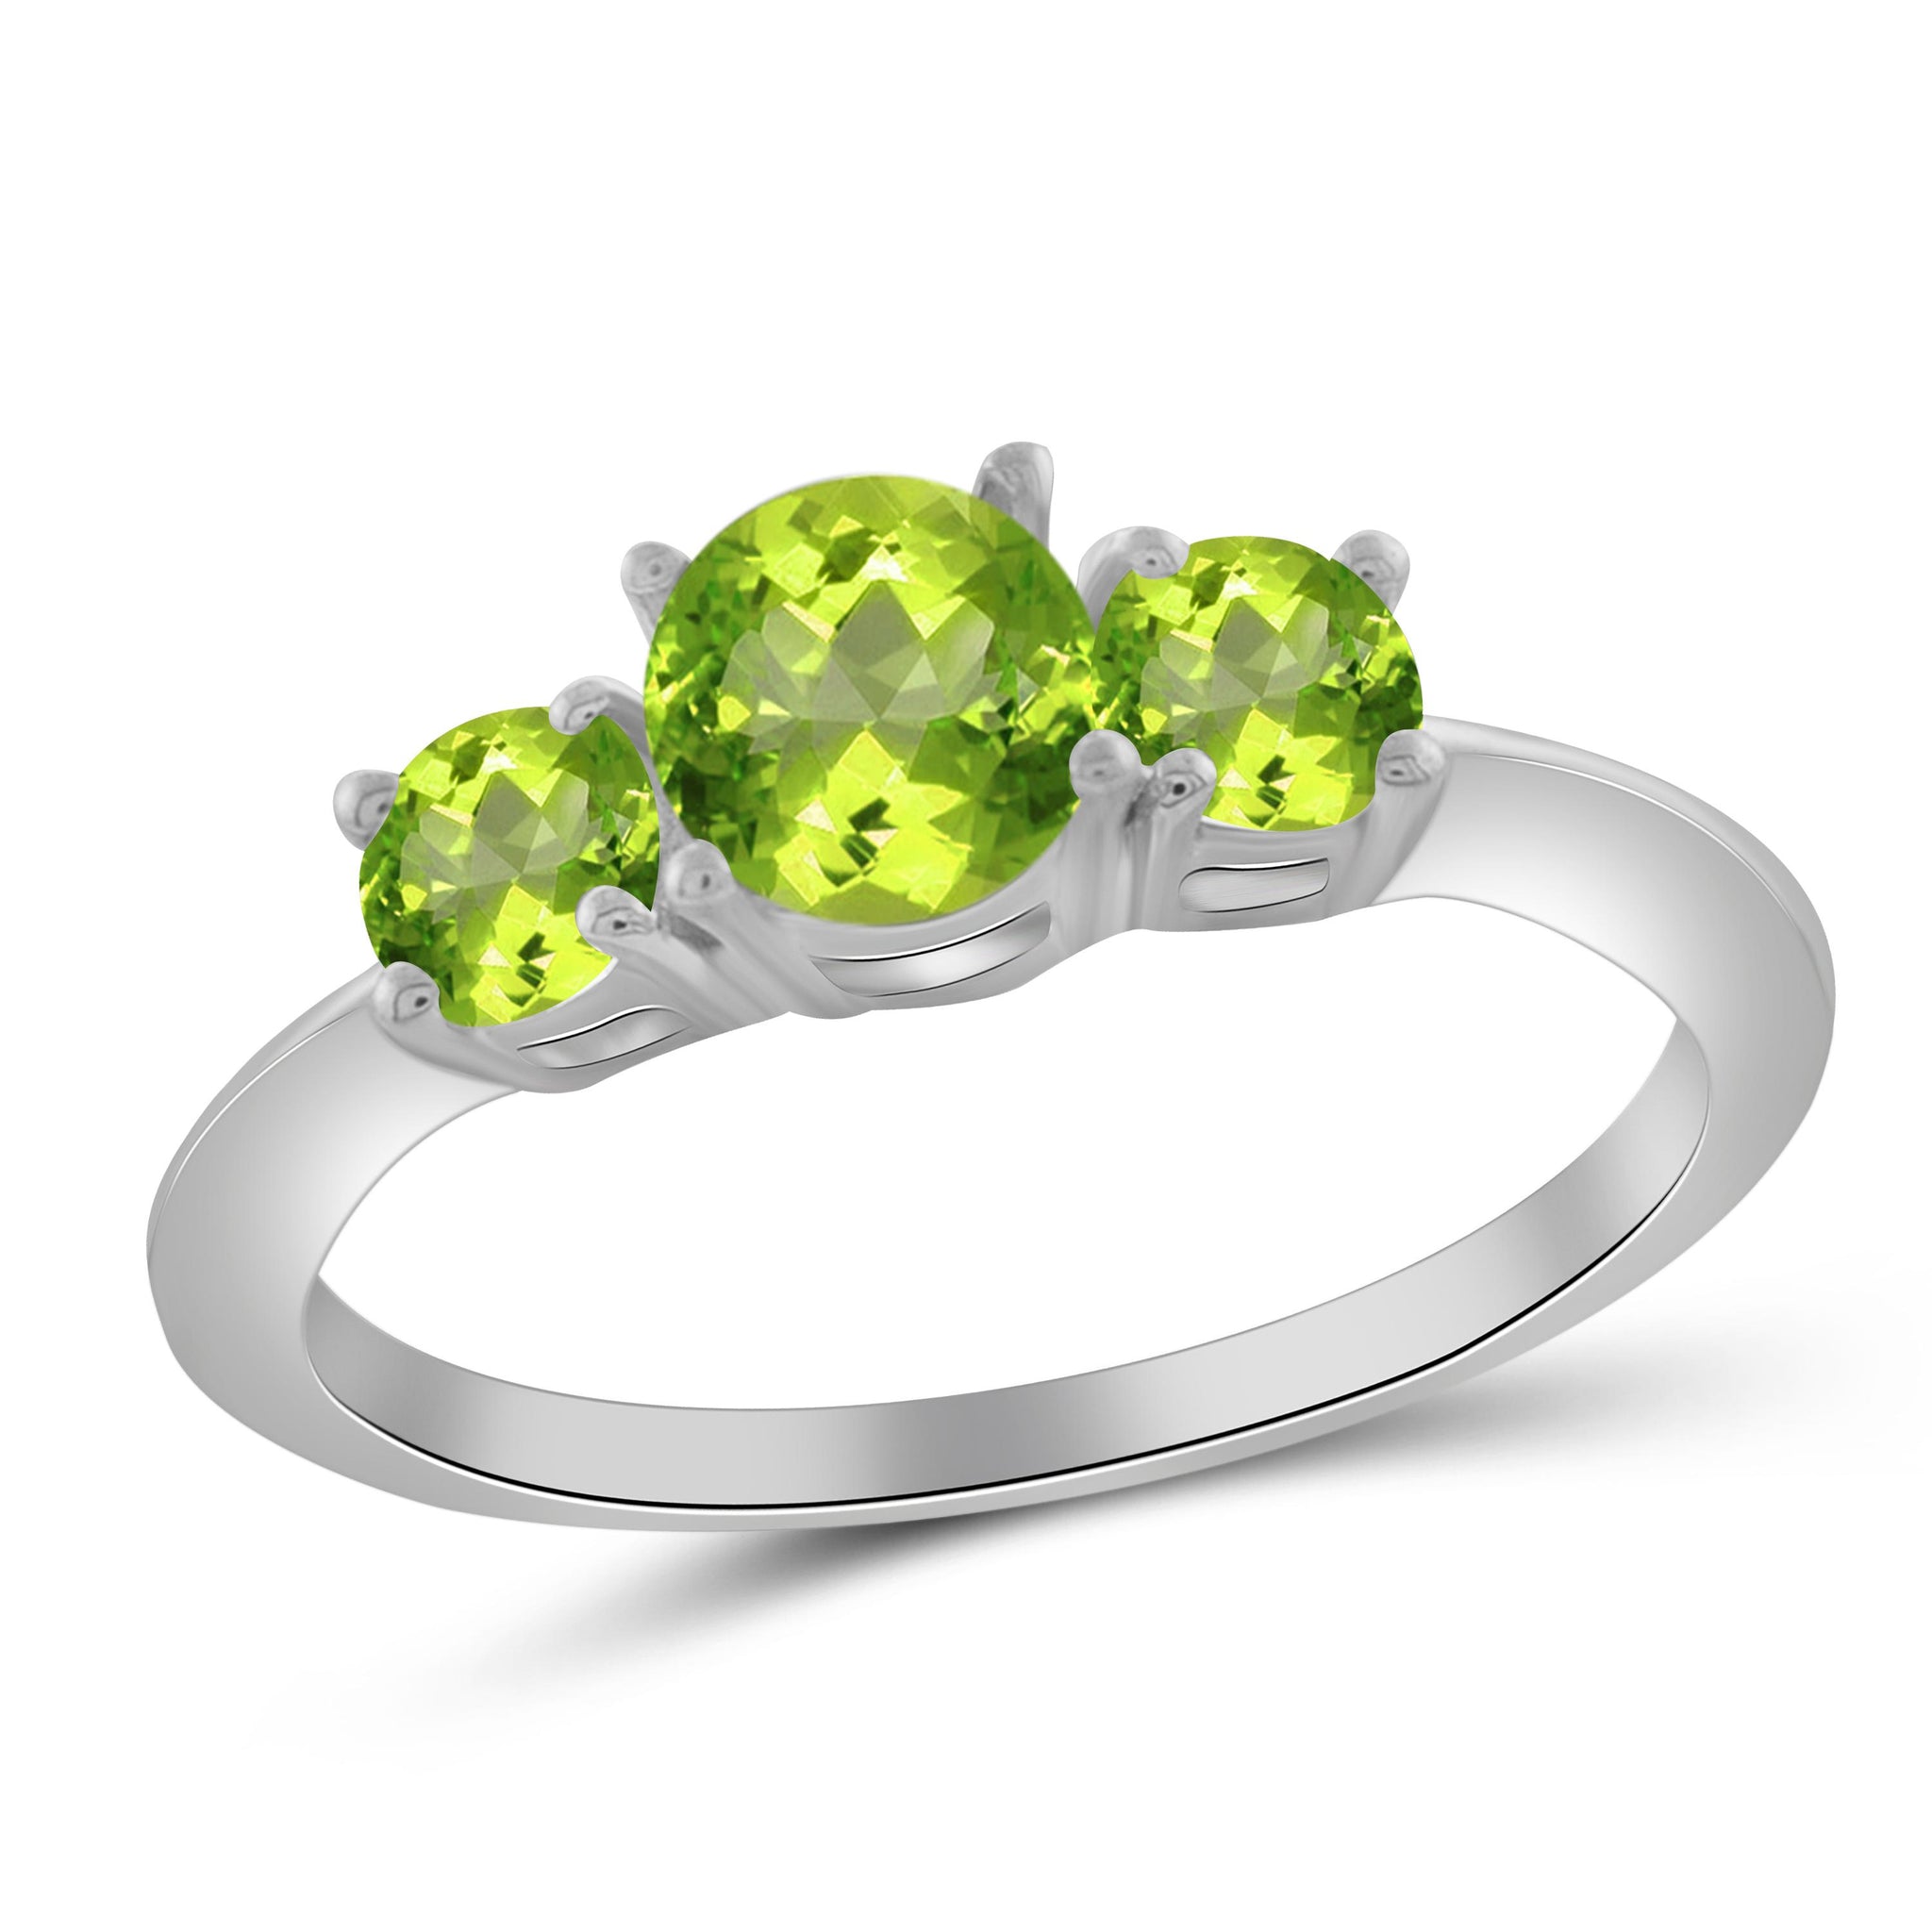 JewelonFire 1.00 Carat T.G.W. Peridot Sterling Silver Ring - Assorted Colors